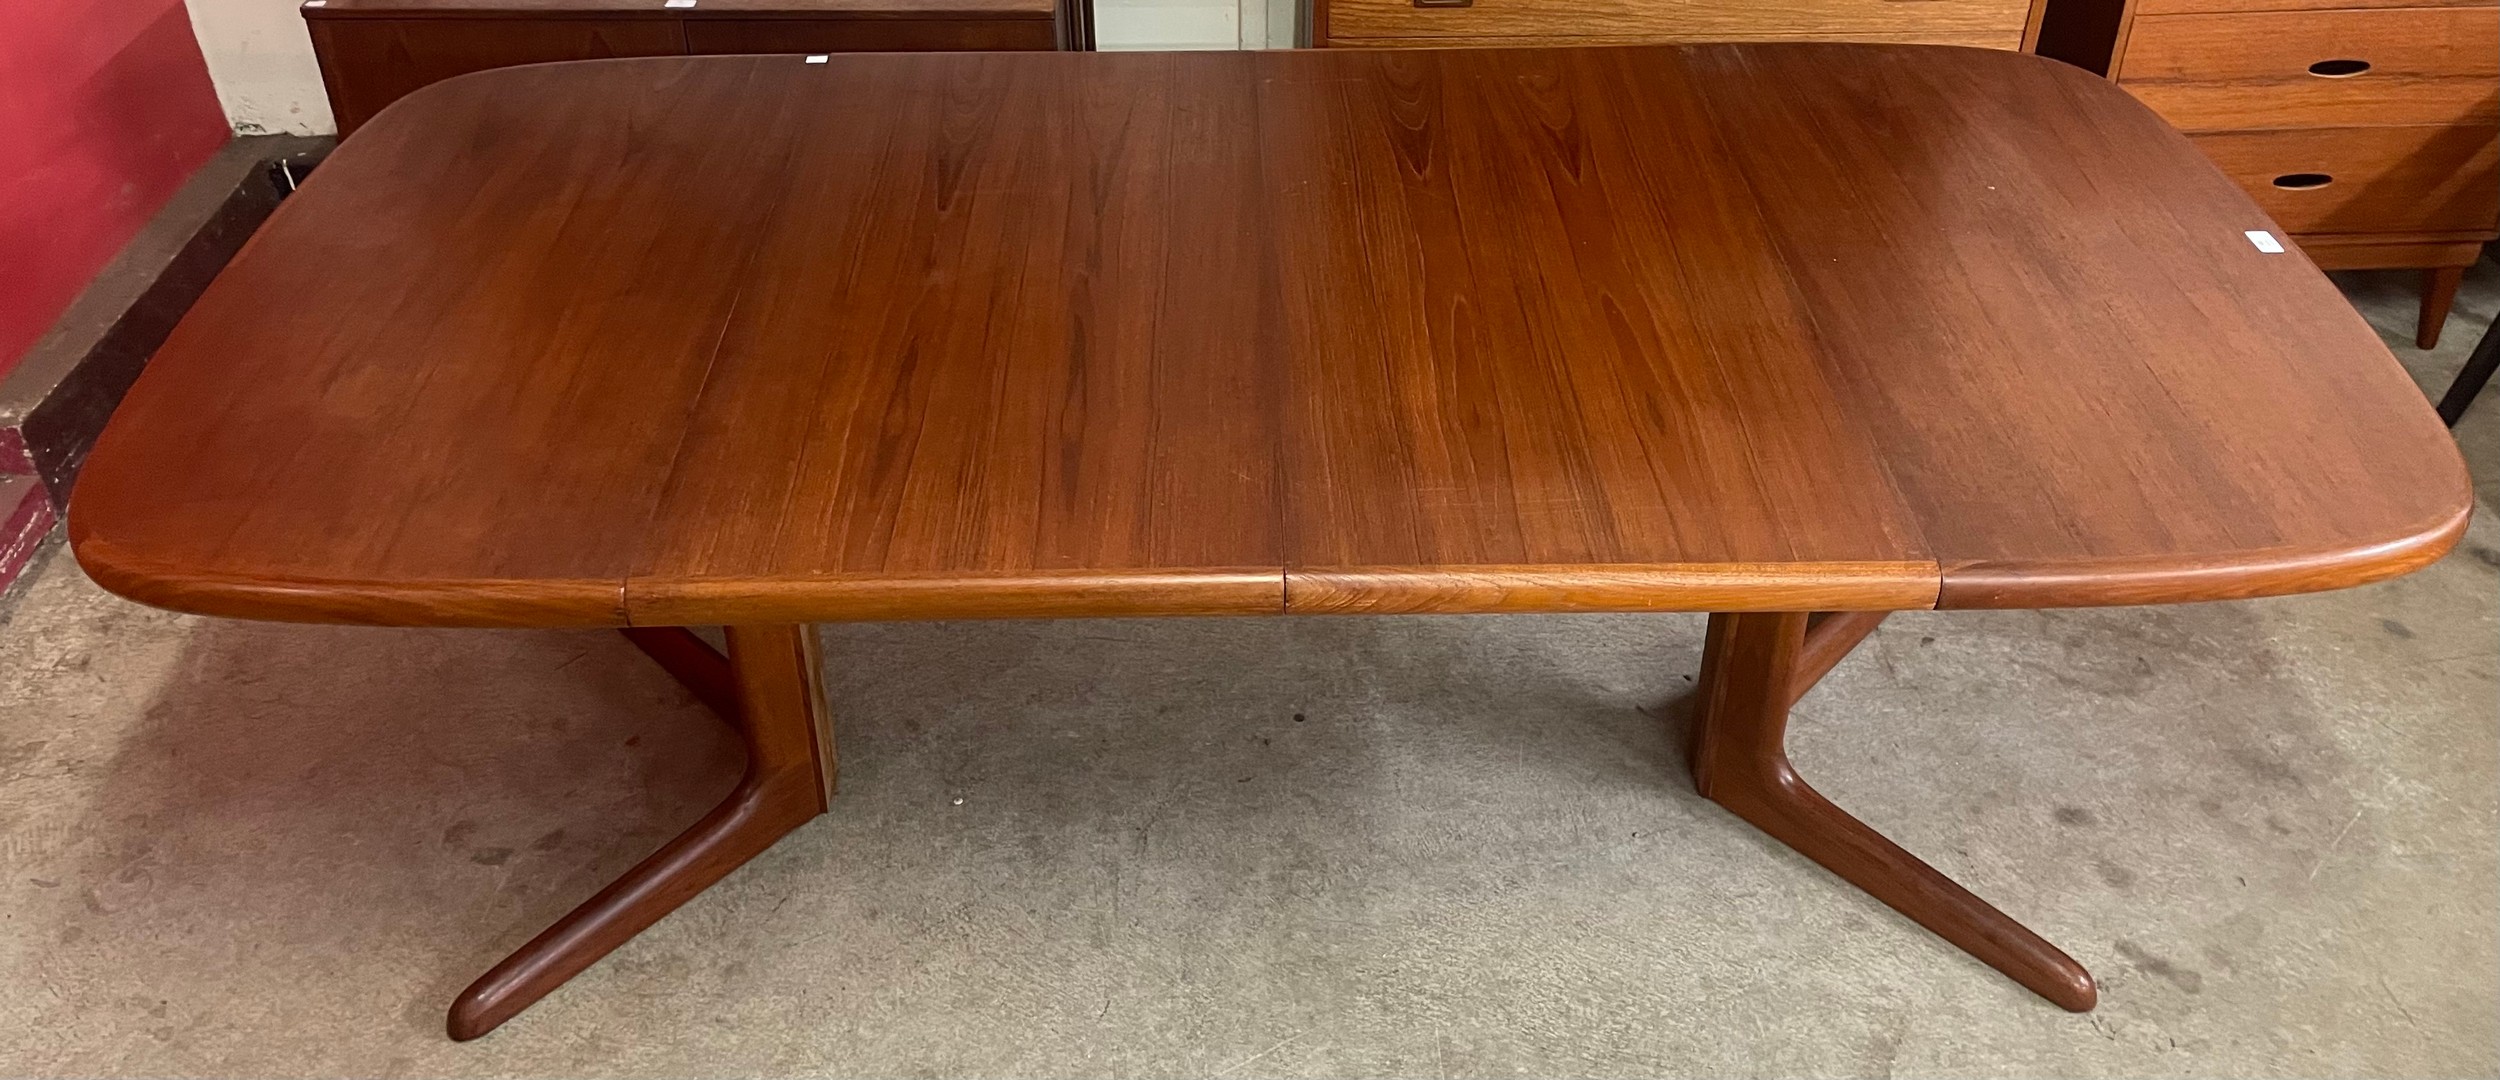 A Danish teak two leaf extending dining table - Image 2 of 2